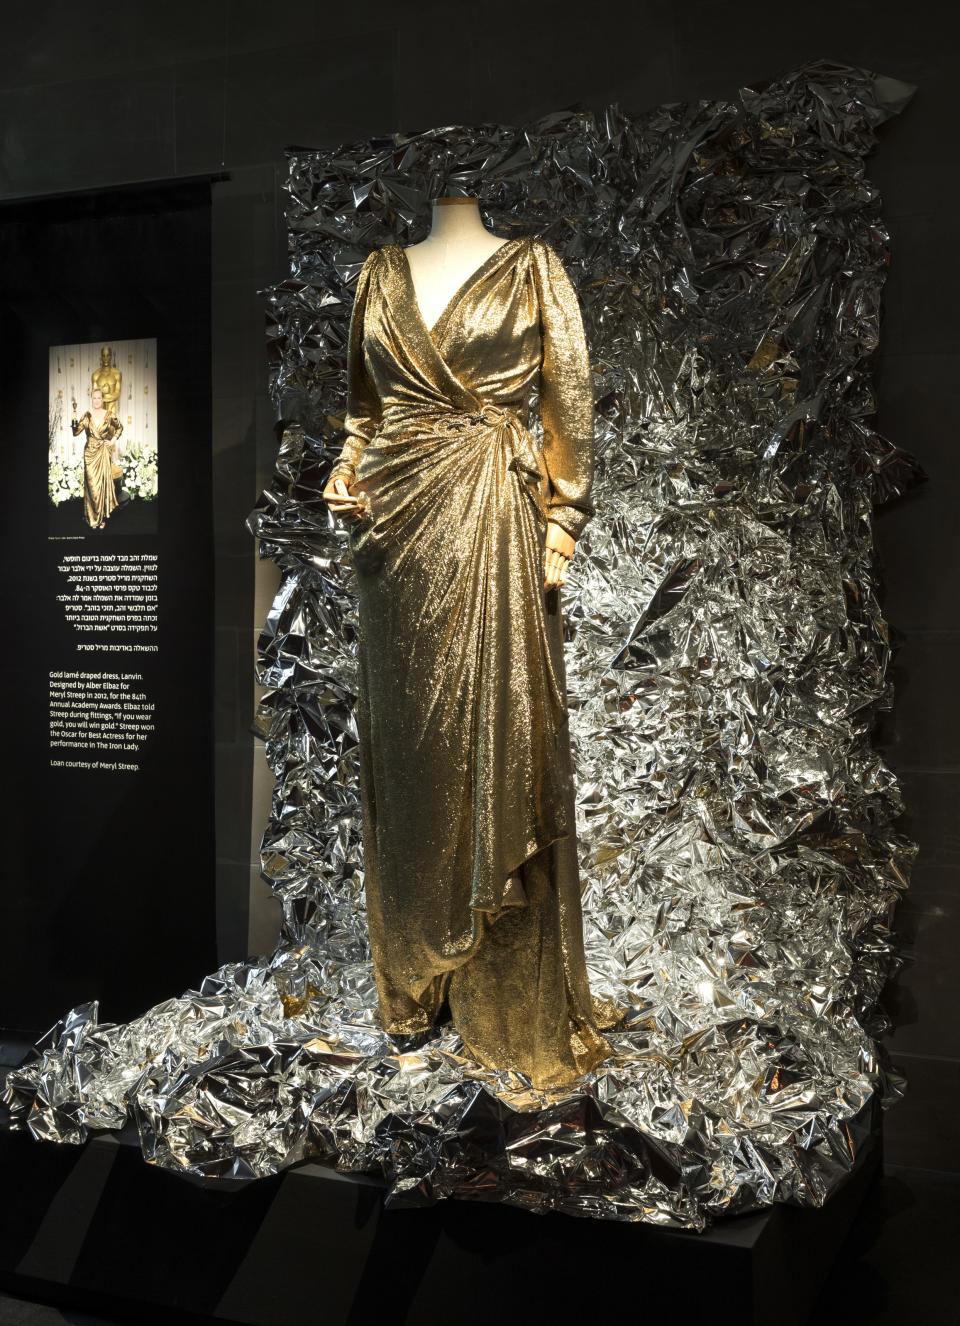 The Lanvin dress Meryl Streep wore to the 2012 Academy Awards.